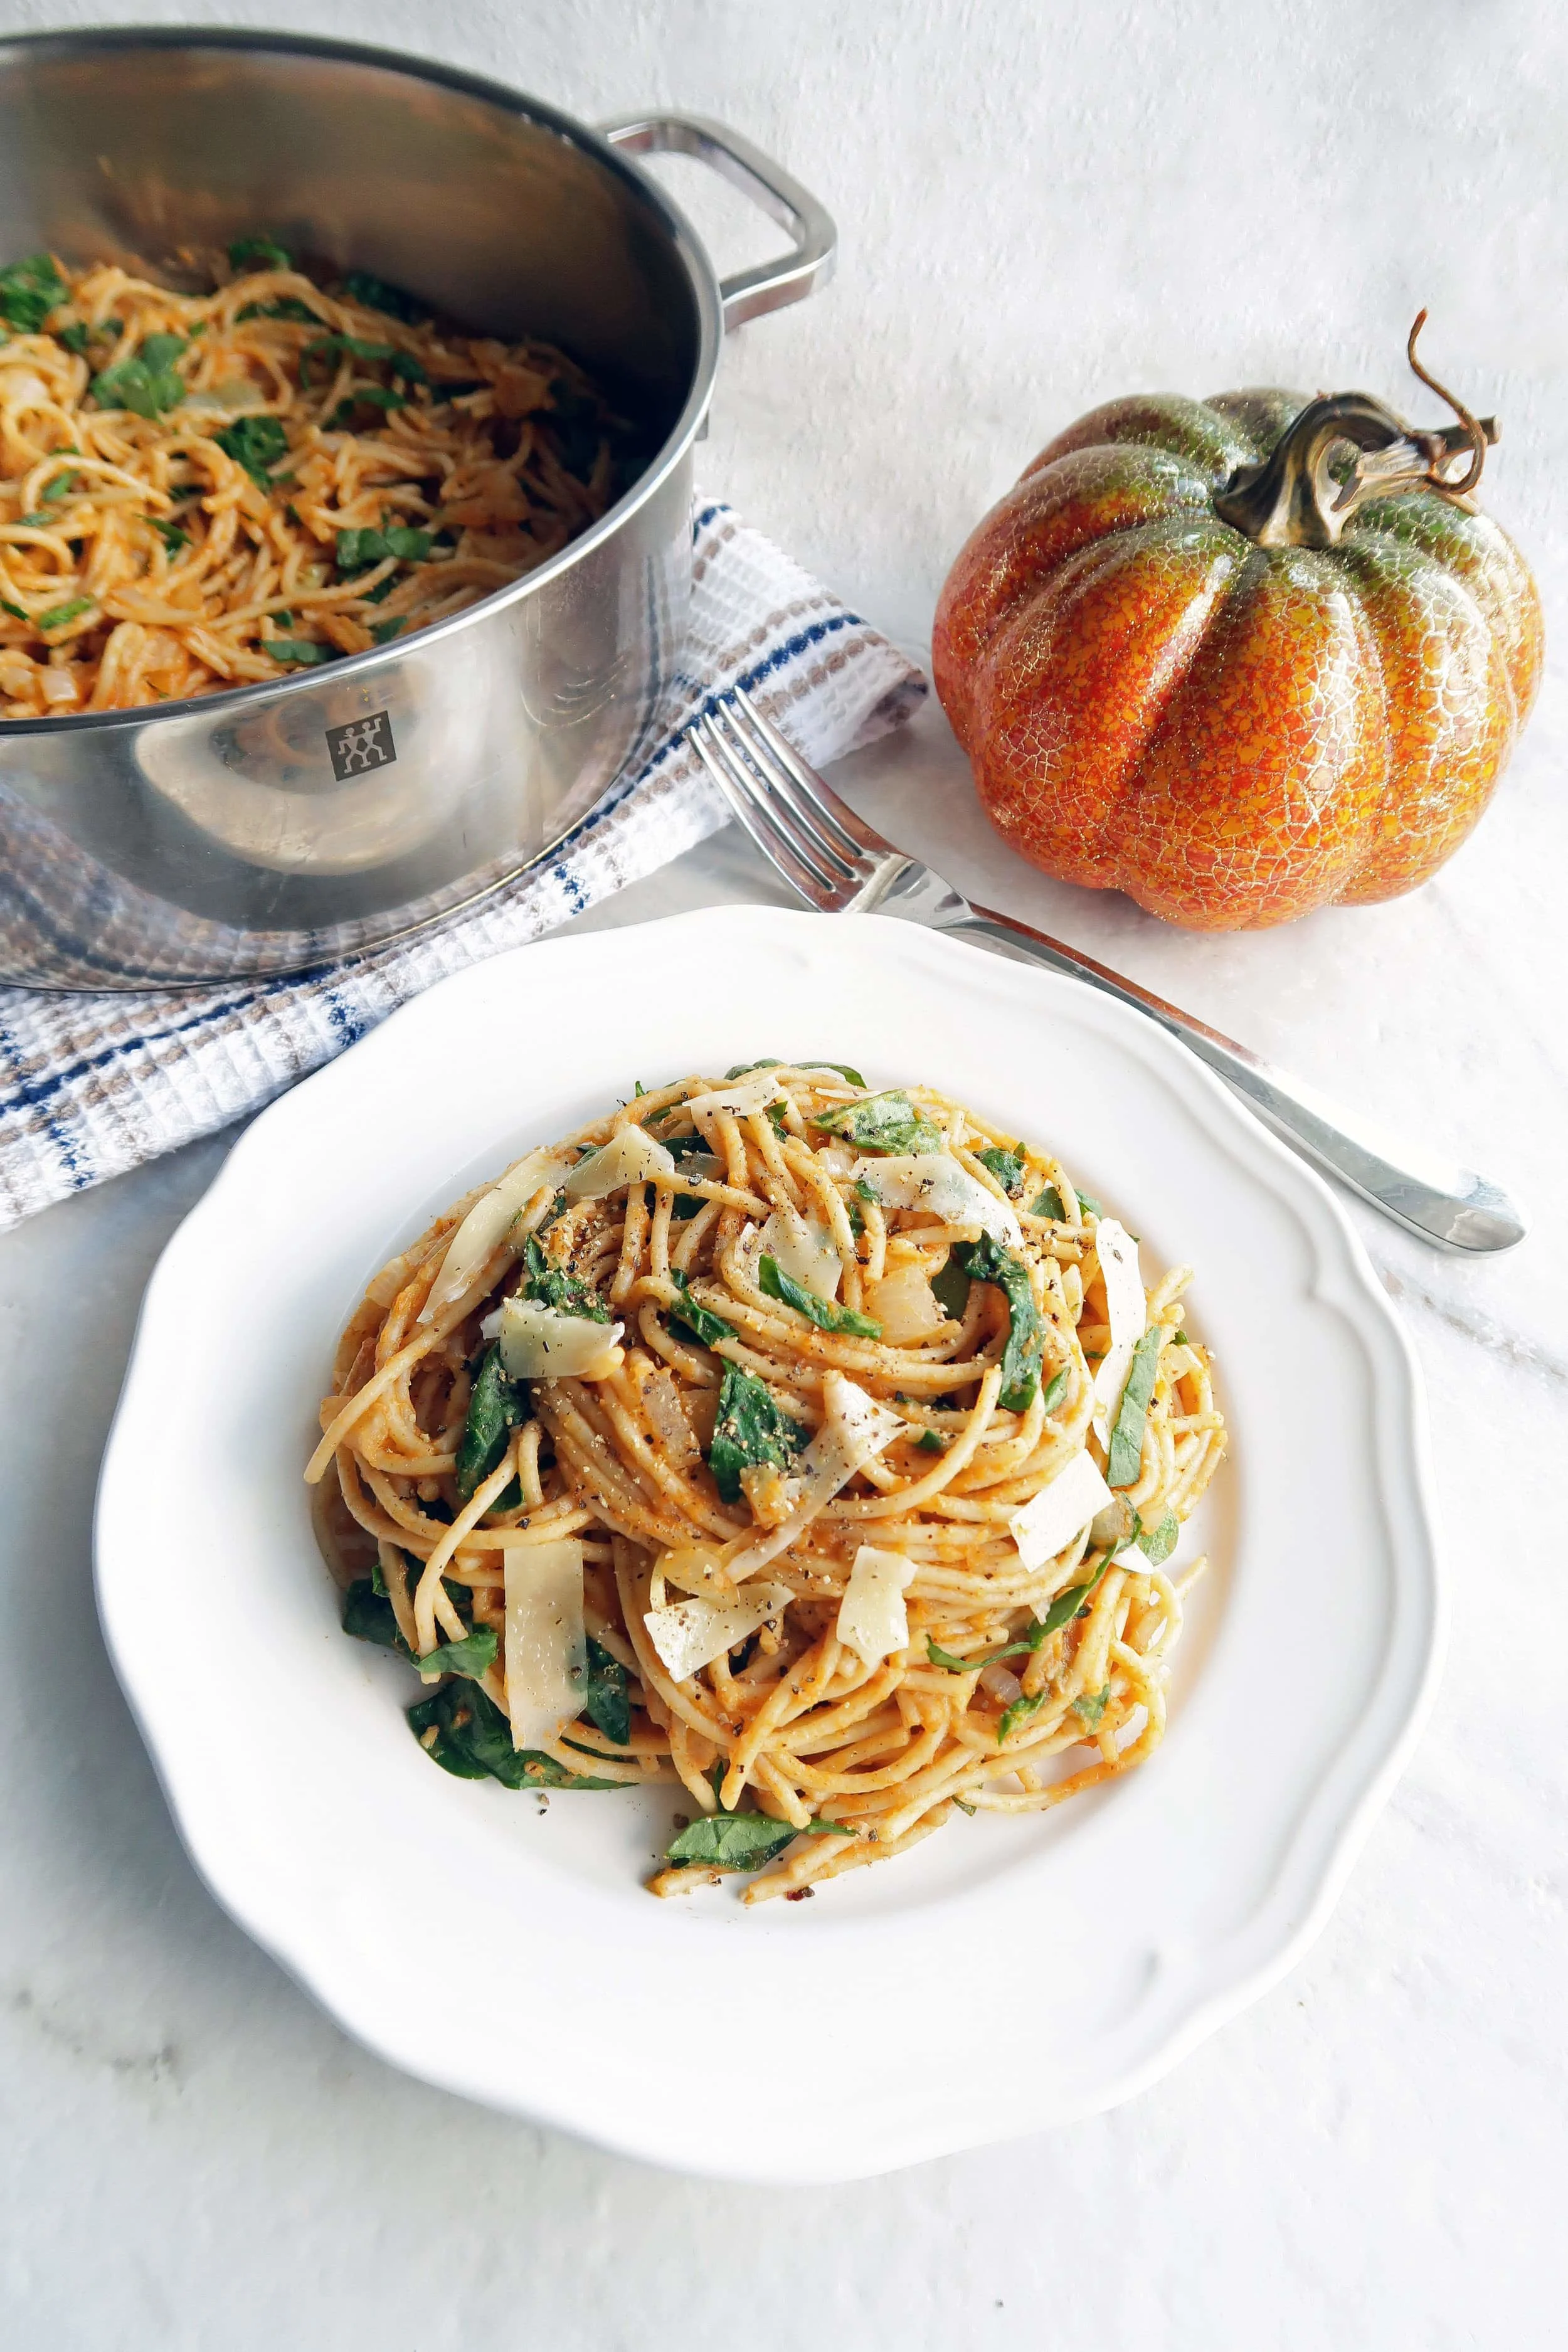 Spaghetti with creamy pumpkin sauce on white plate with more spaghetti in a metal pot in the background.